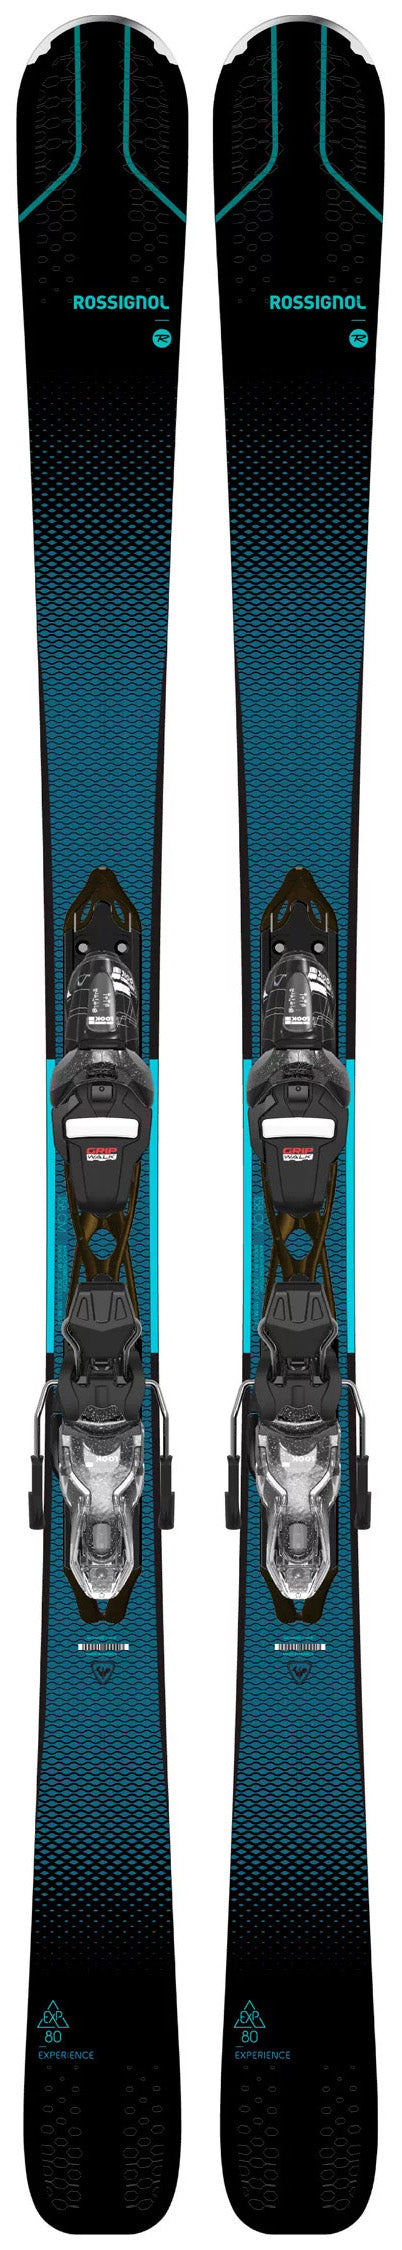 Pack neuf skis Rossignol EXPERIENCE 80 Ci W + XPRESS 11 - neuf déstockage